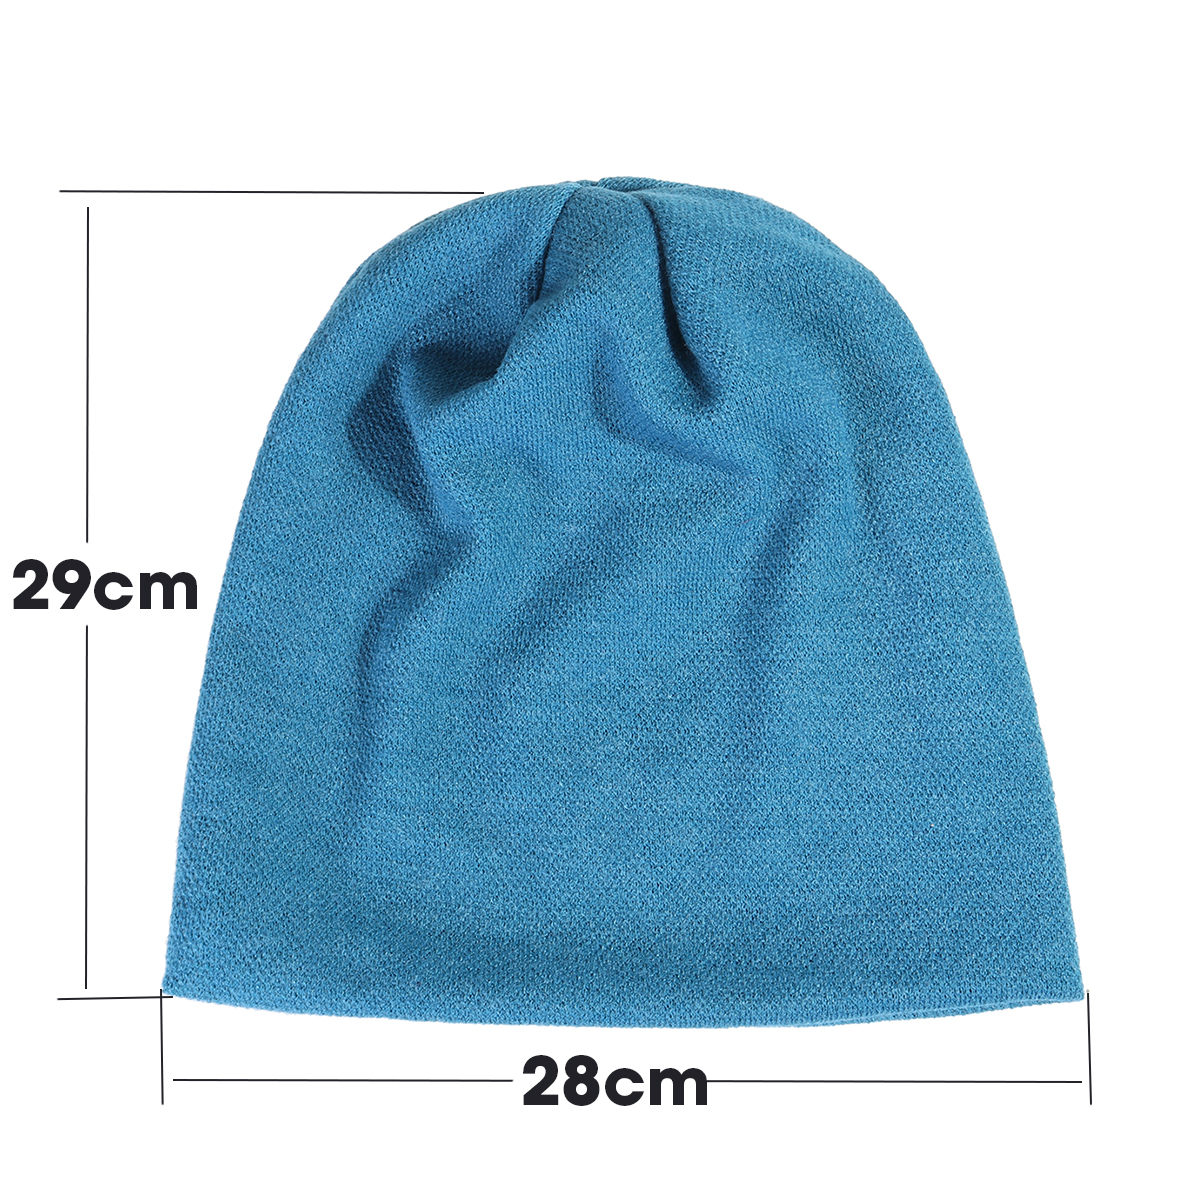 Knitted-Hat-Cotton-Winter-Ski-Running-Hunting-Cycling-Warm-Cap-1628524-2